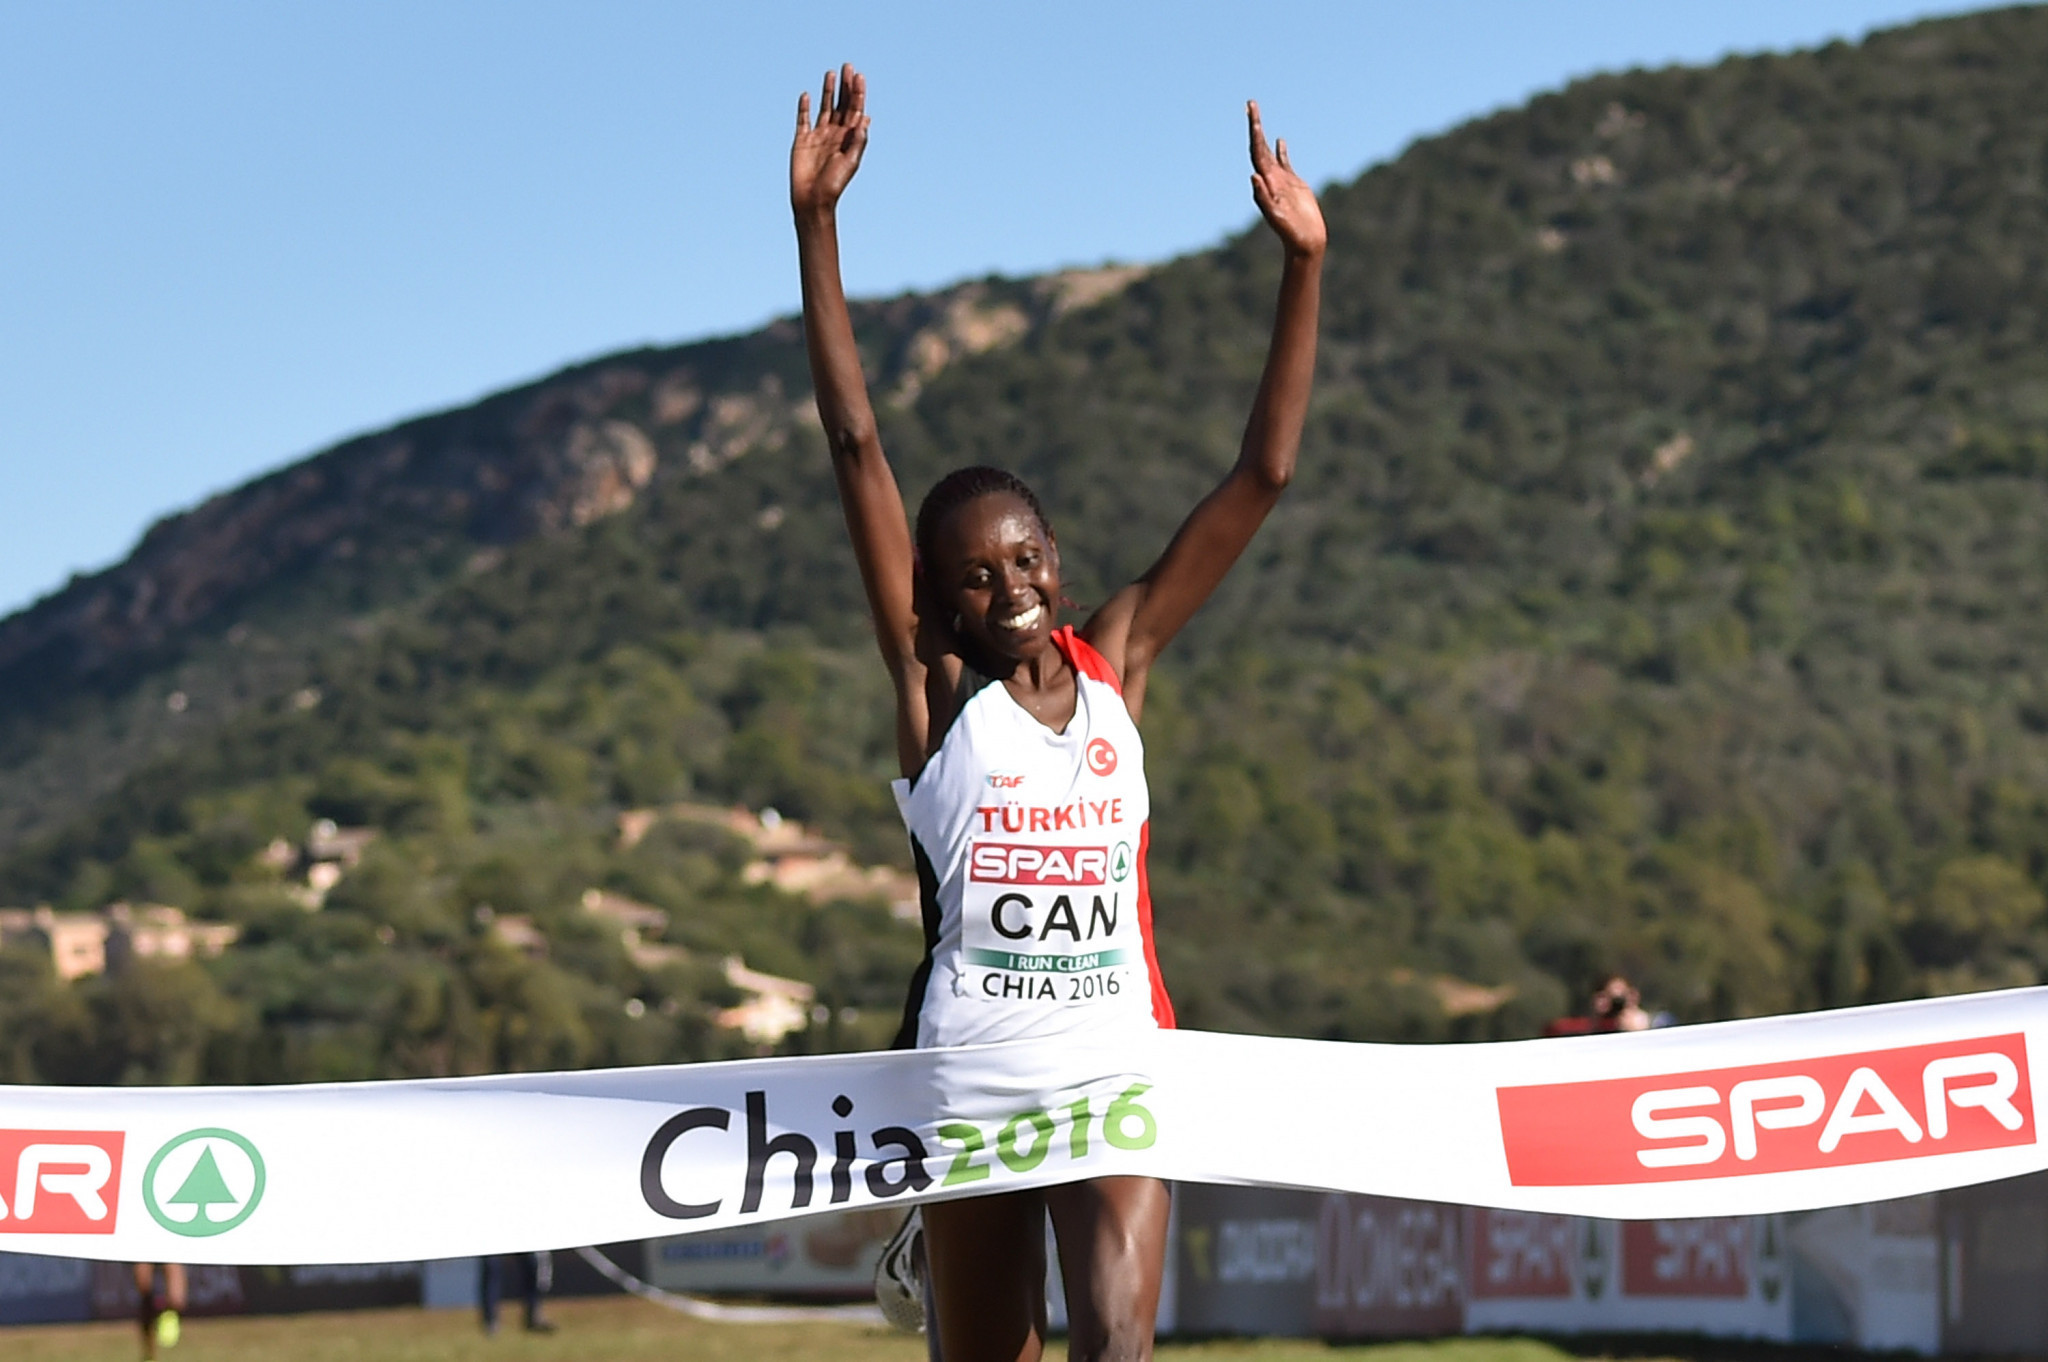 Kenyan-born Yasemin Can won the European Cross Country Championships in Chia last year ©Getty Images